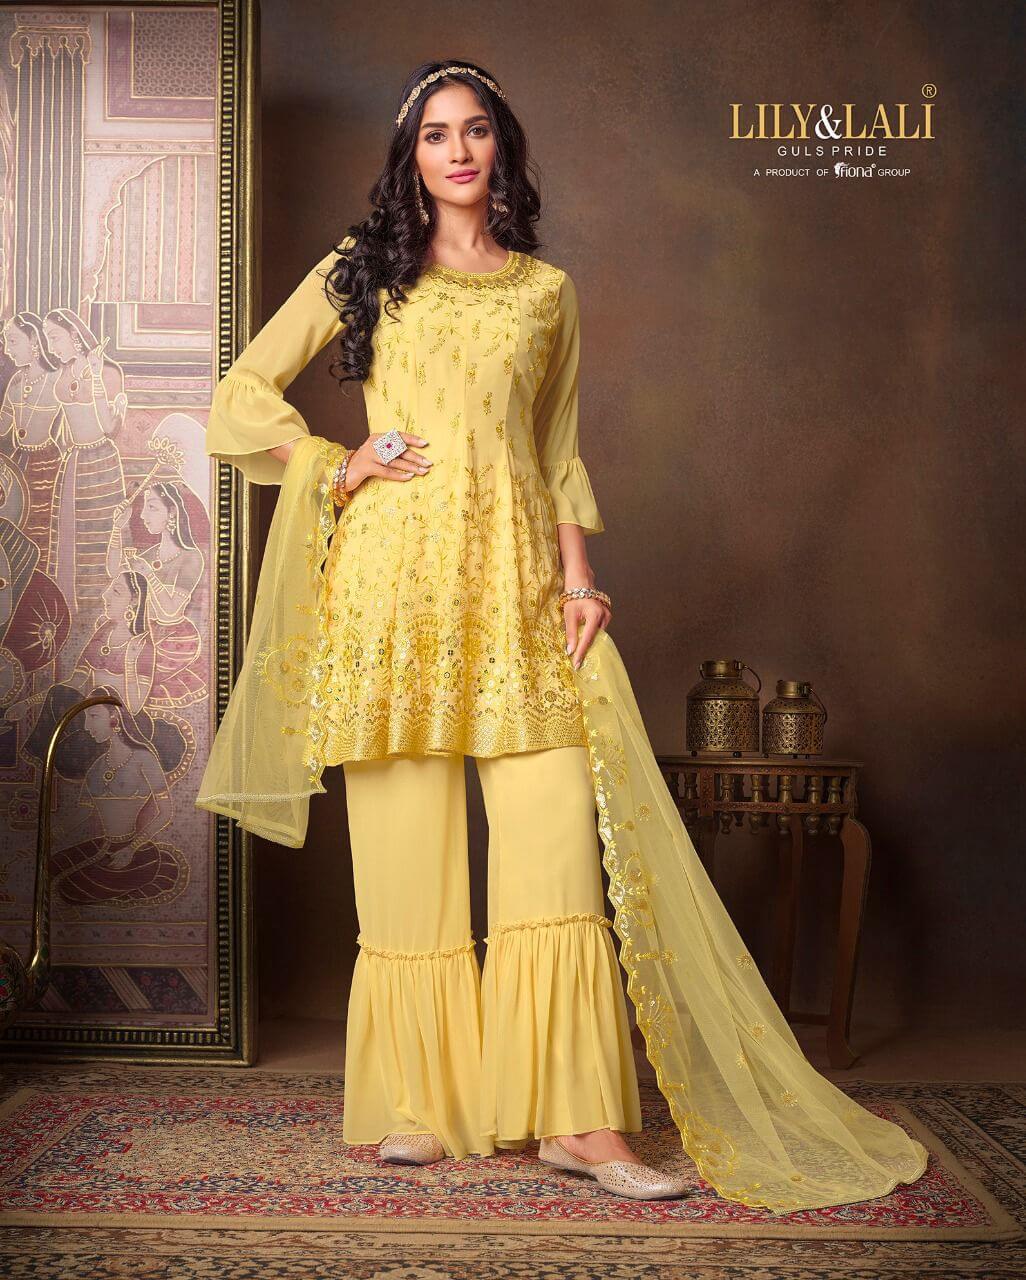 Lily and Lali Arizona Designer Wedding Party Salwar Suits collection 2